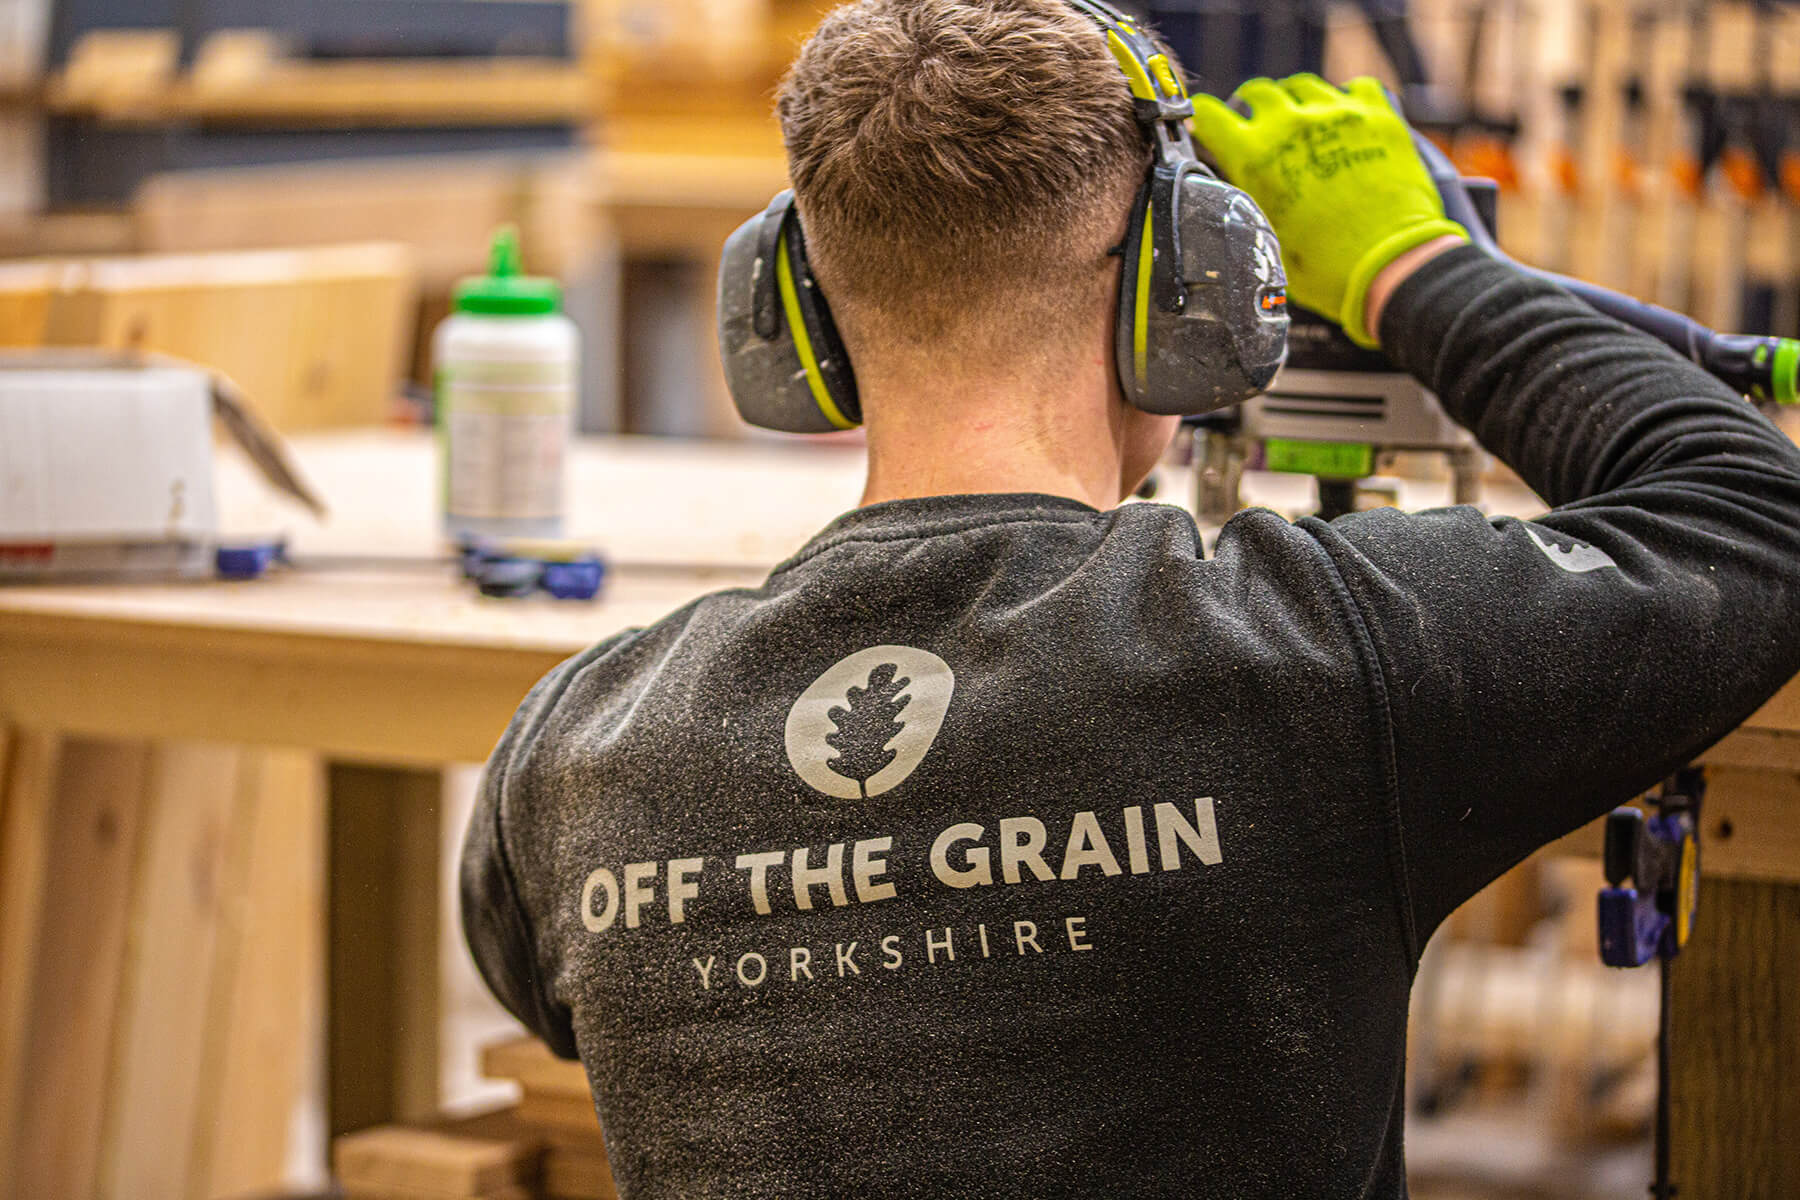 off the grain - handmade in yorkshire